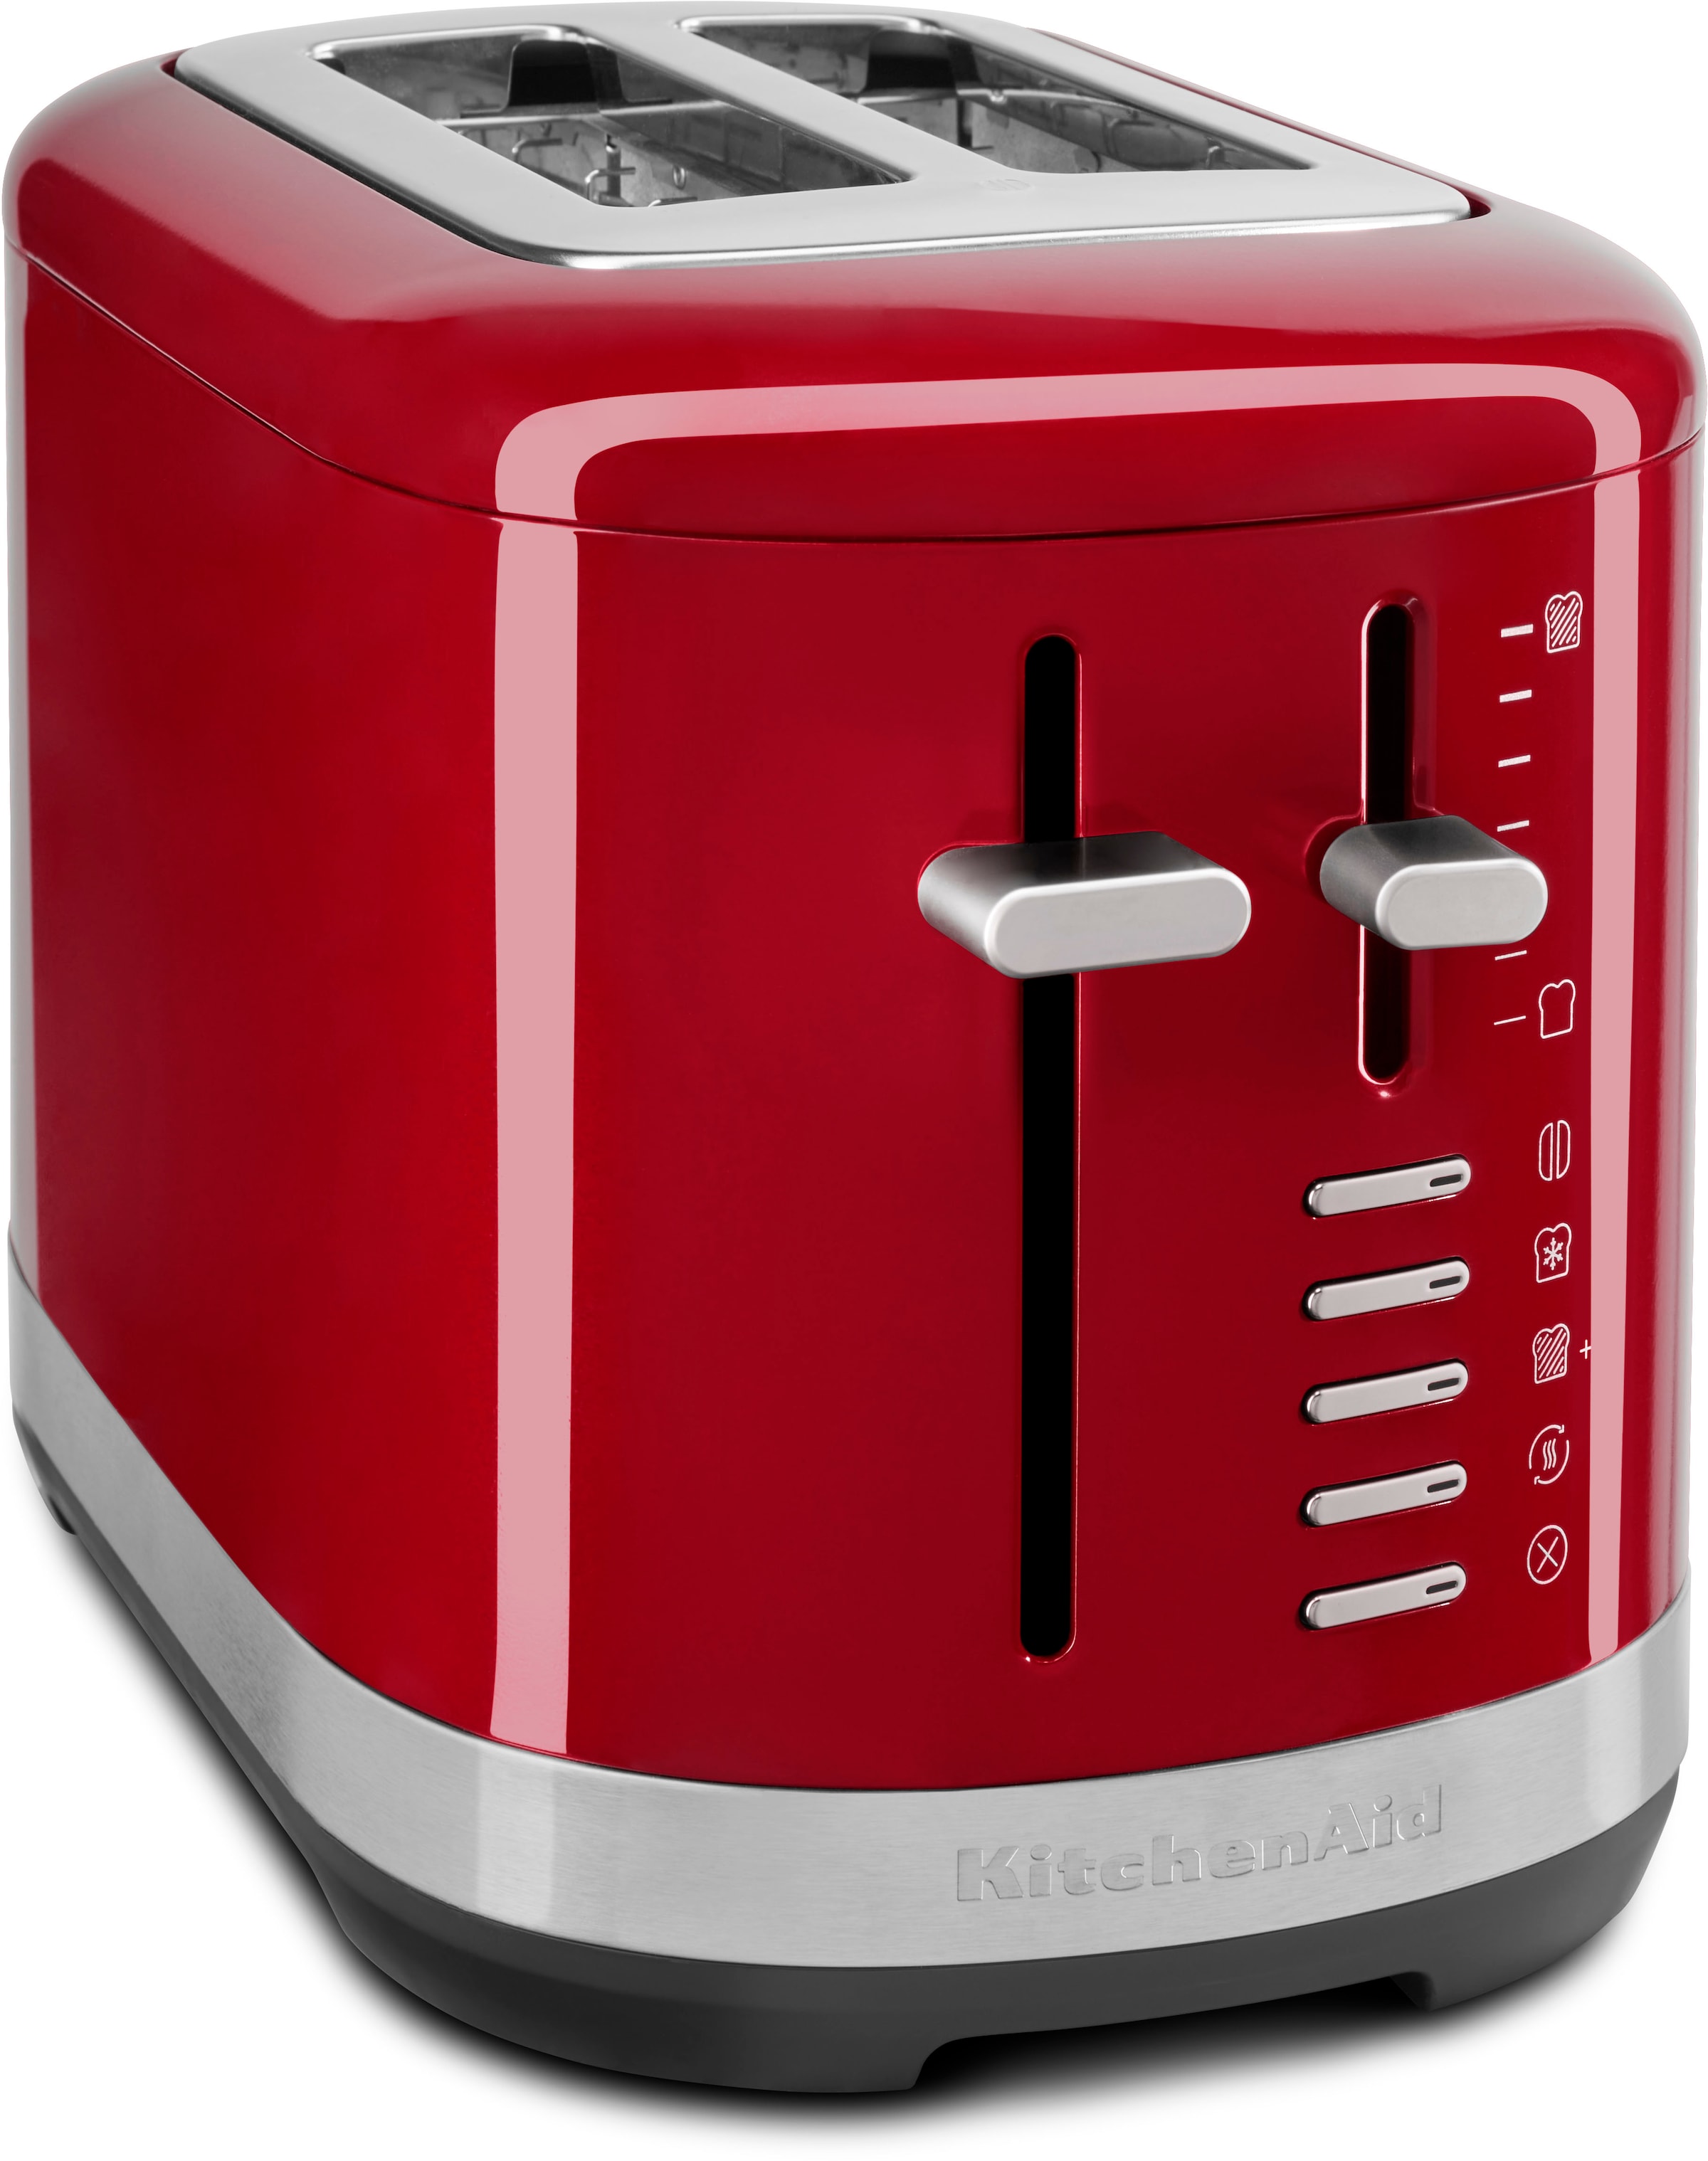 Toaster »5KMT2109EAC empire red«, 2 Schlitze, 980 W